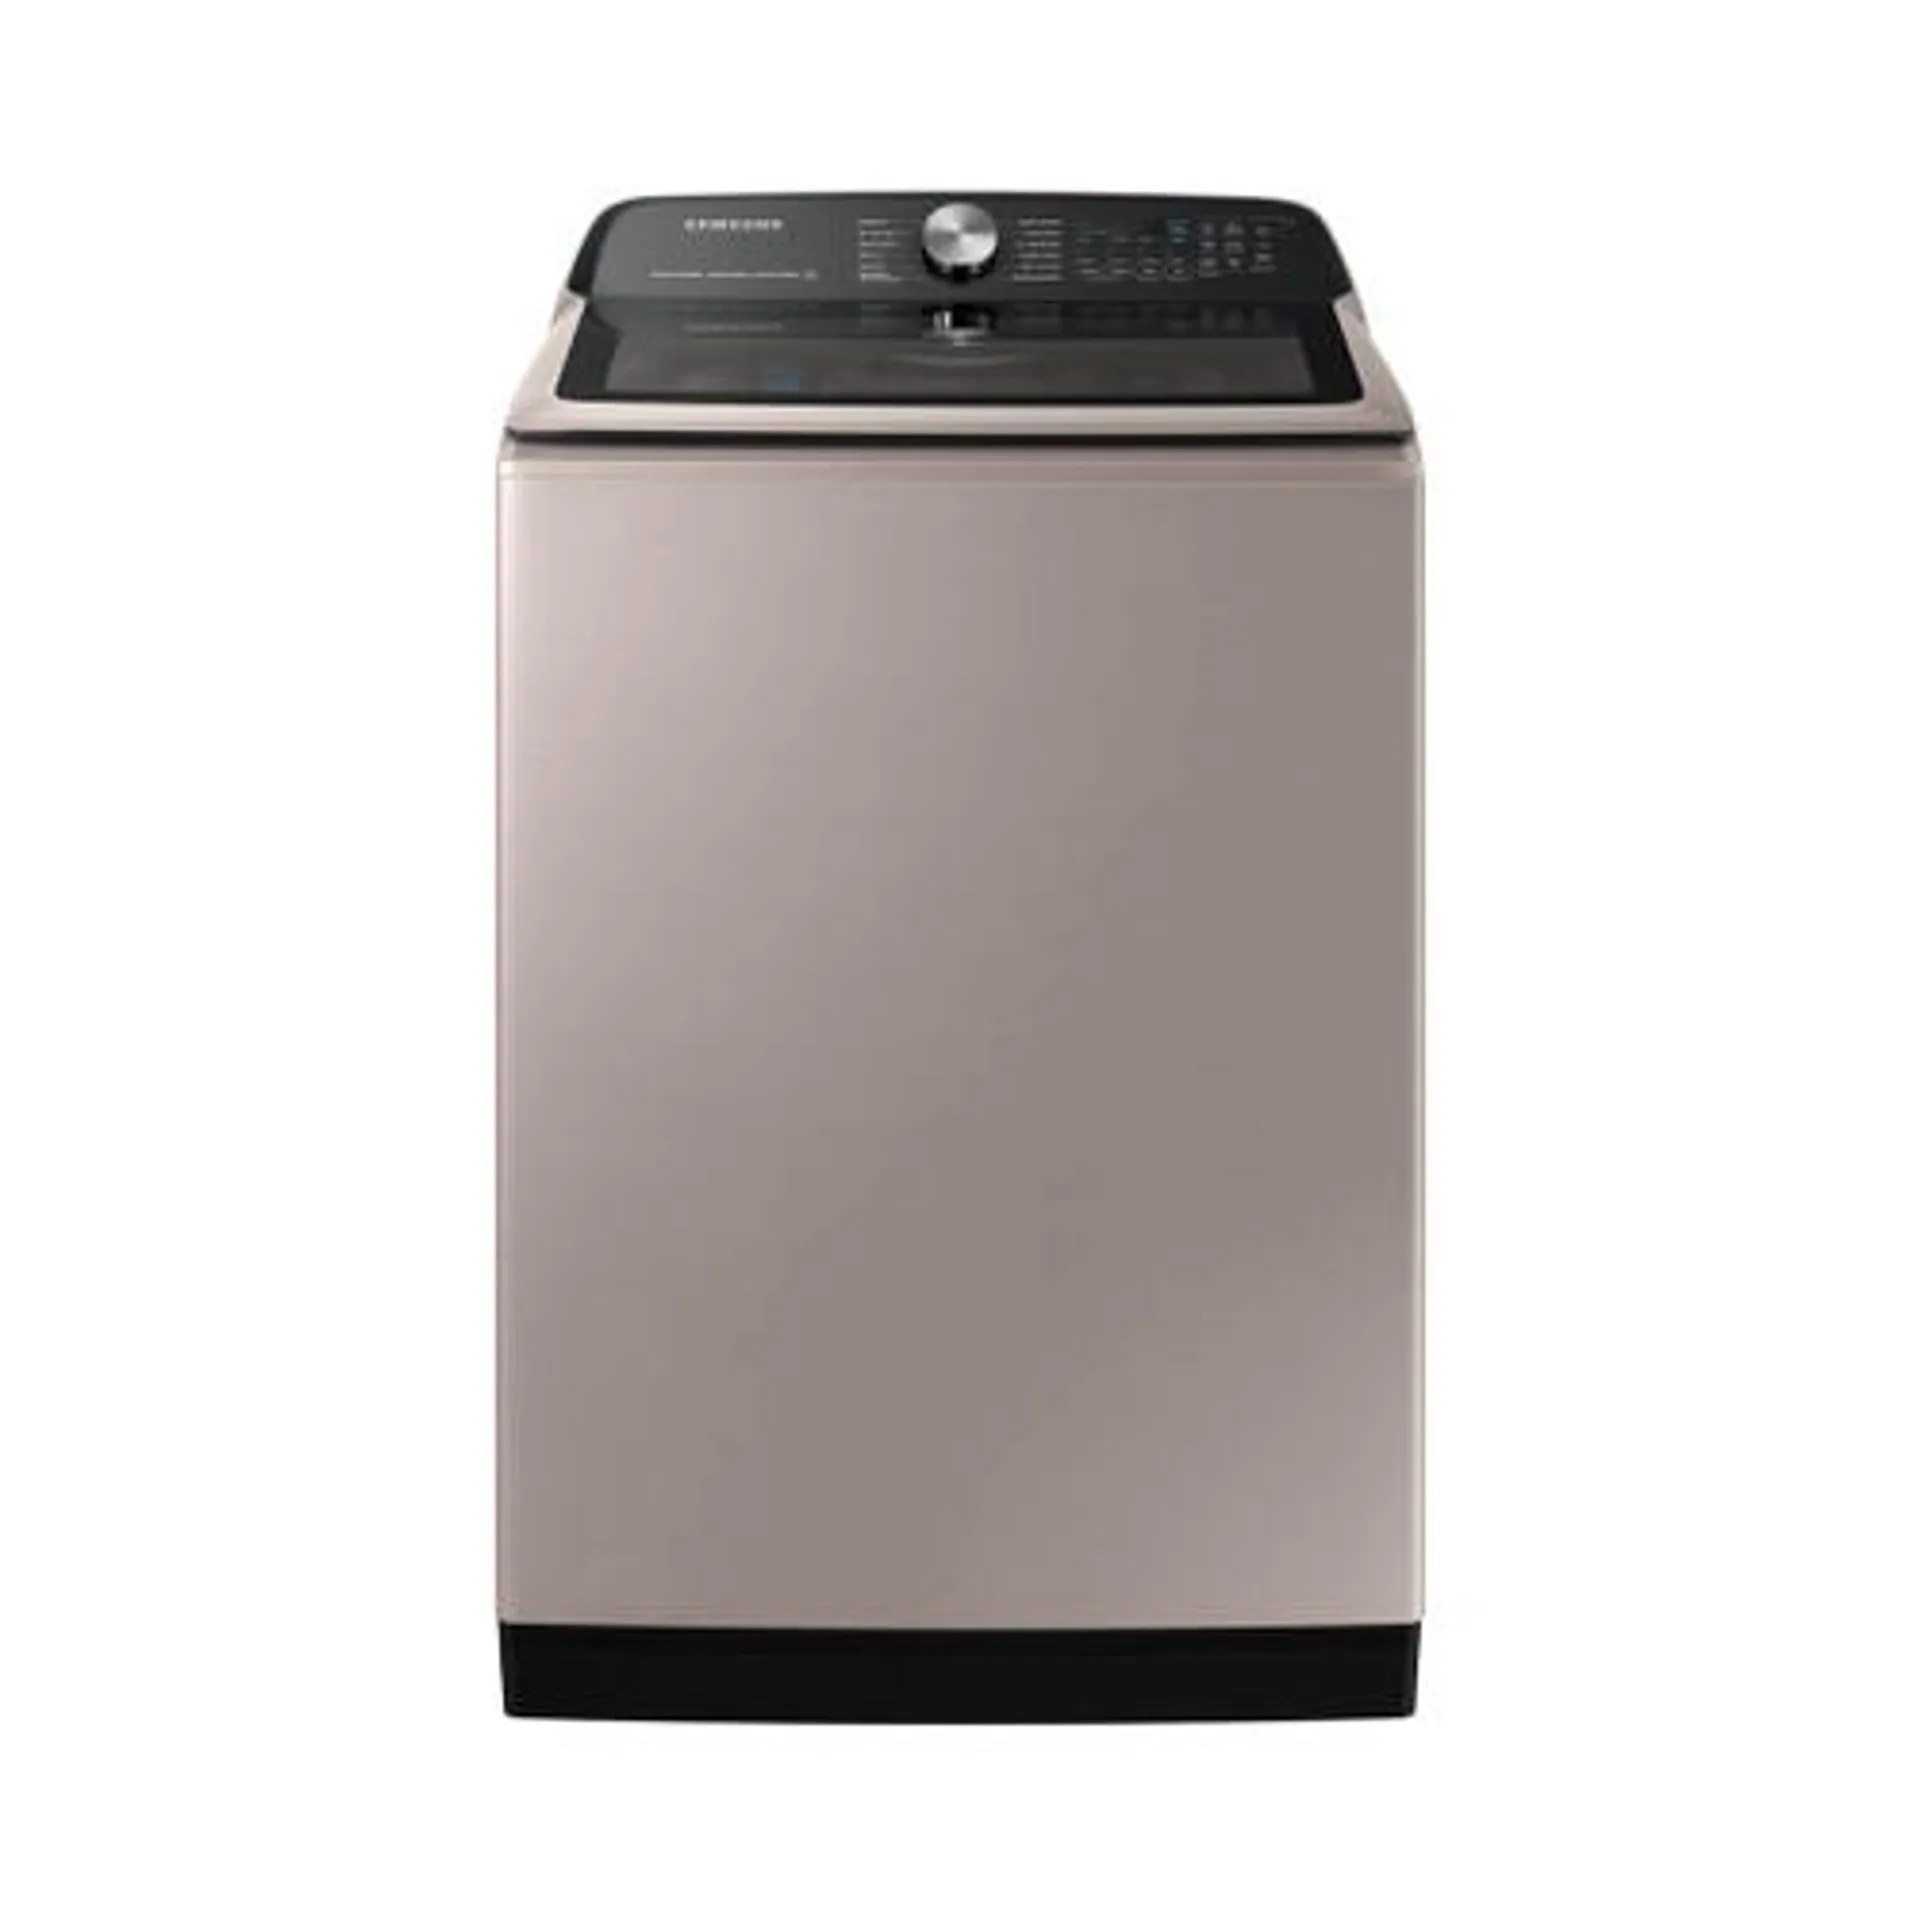 Samsung 5.2 cu. ft. Large Capacity Champagne Smart Top Load Washer - WA52A5500AC